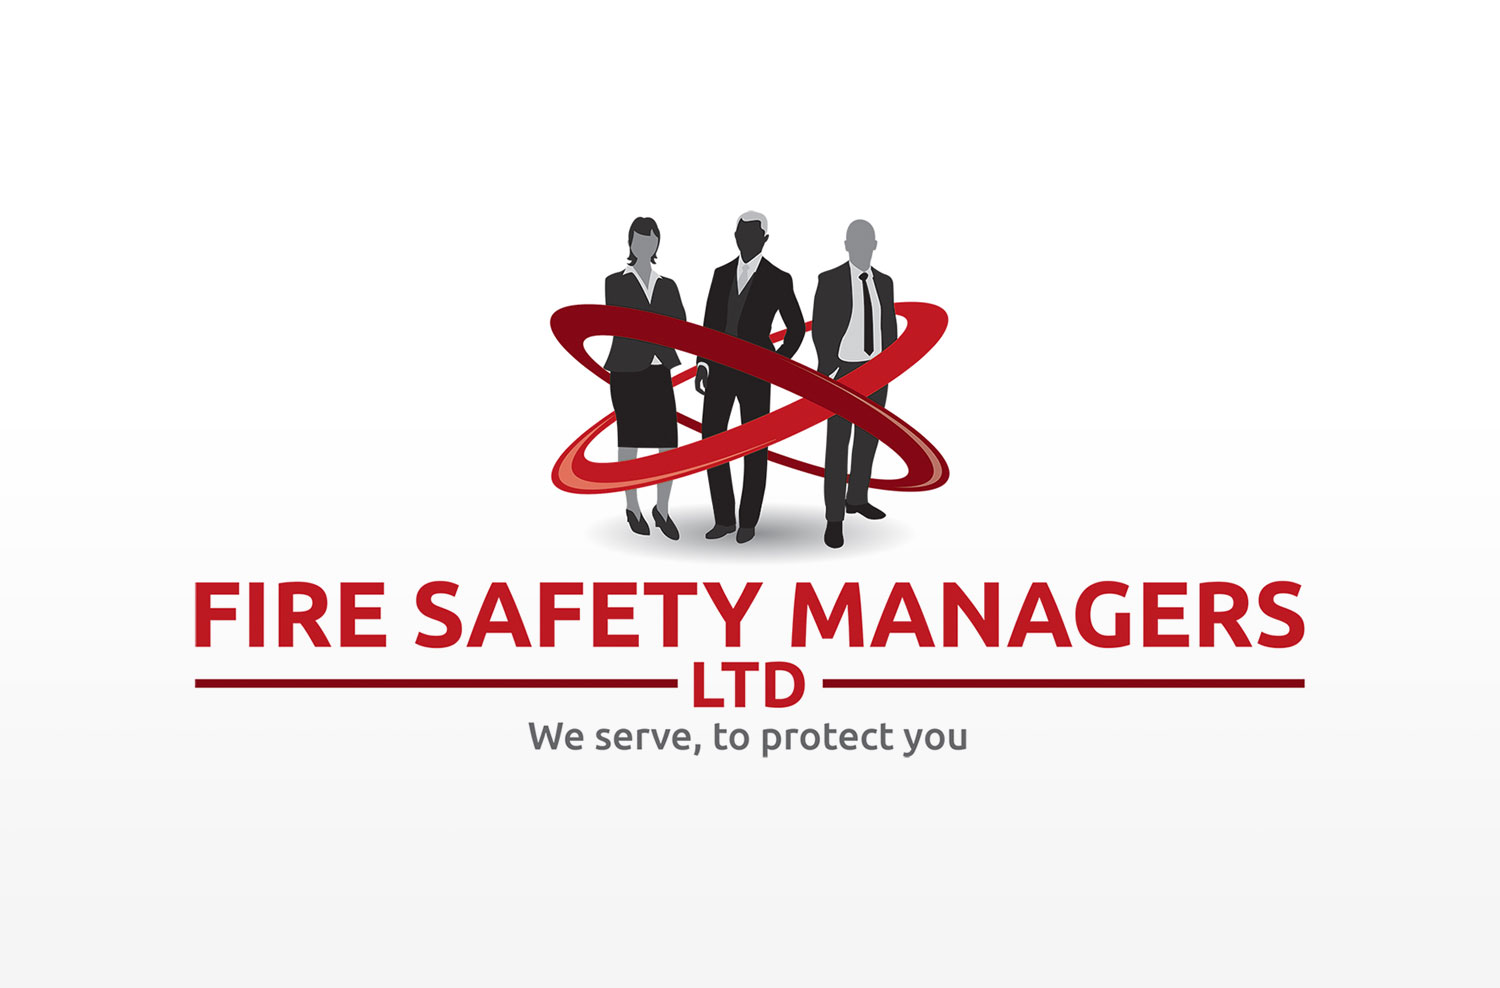 Fire Safety Managers DropJaw Ventures client news